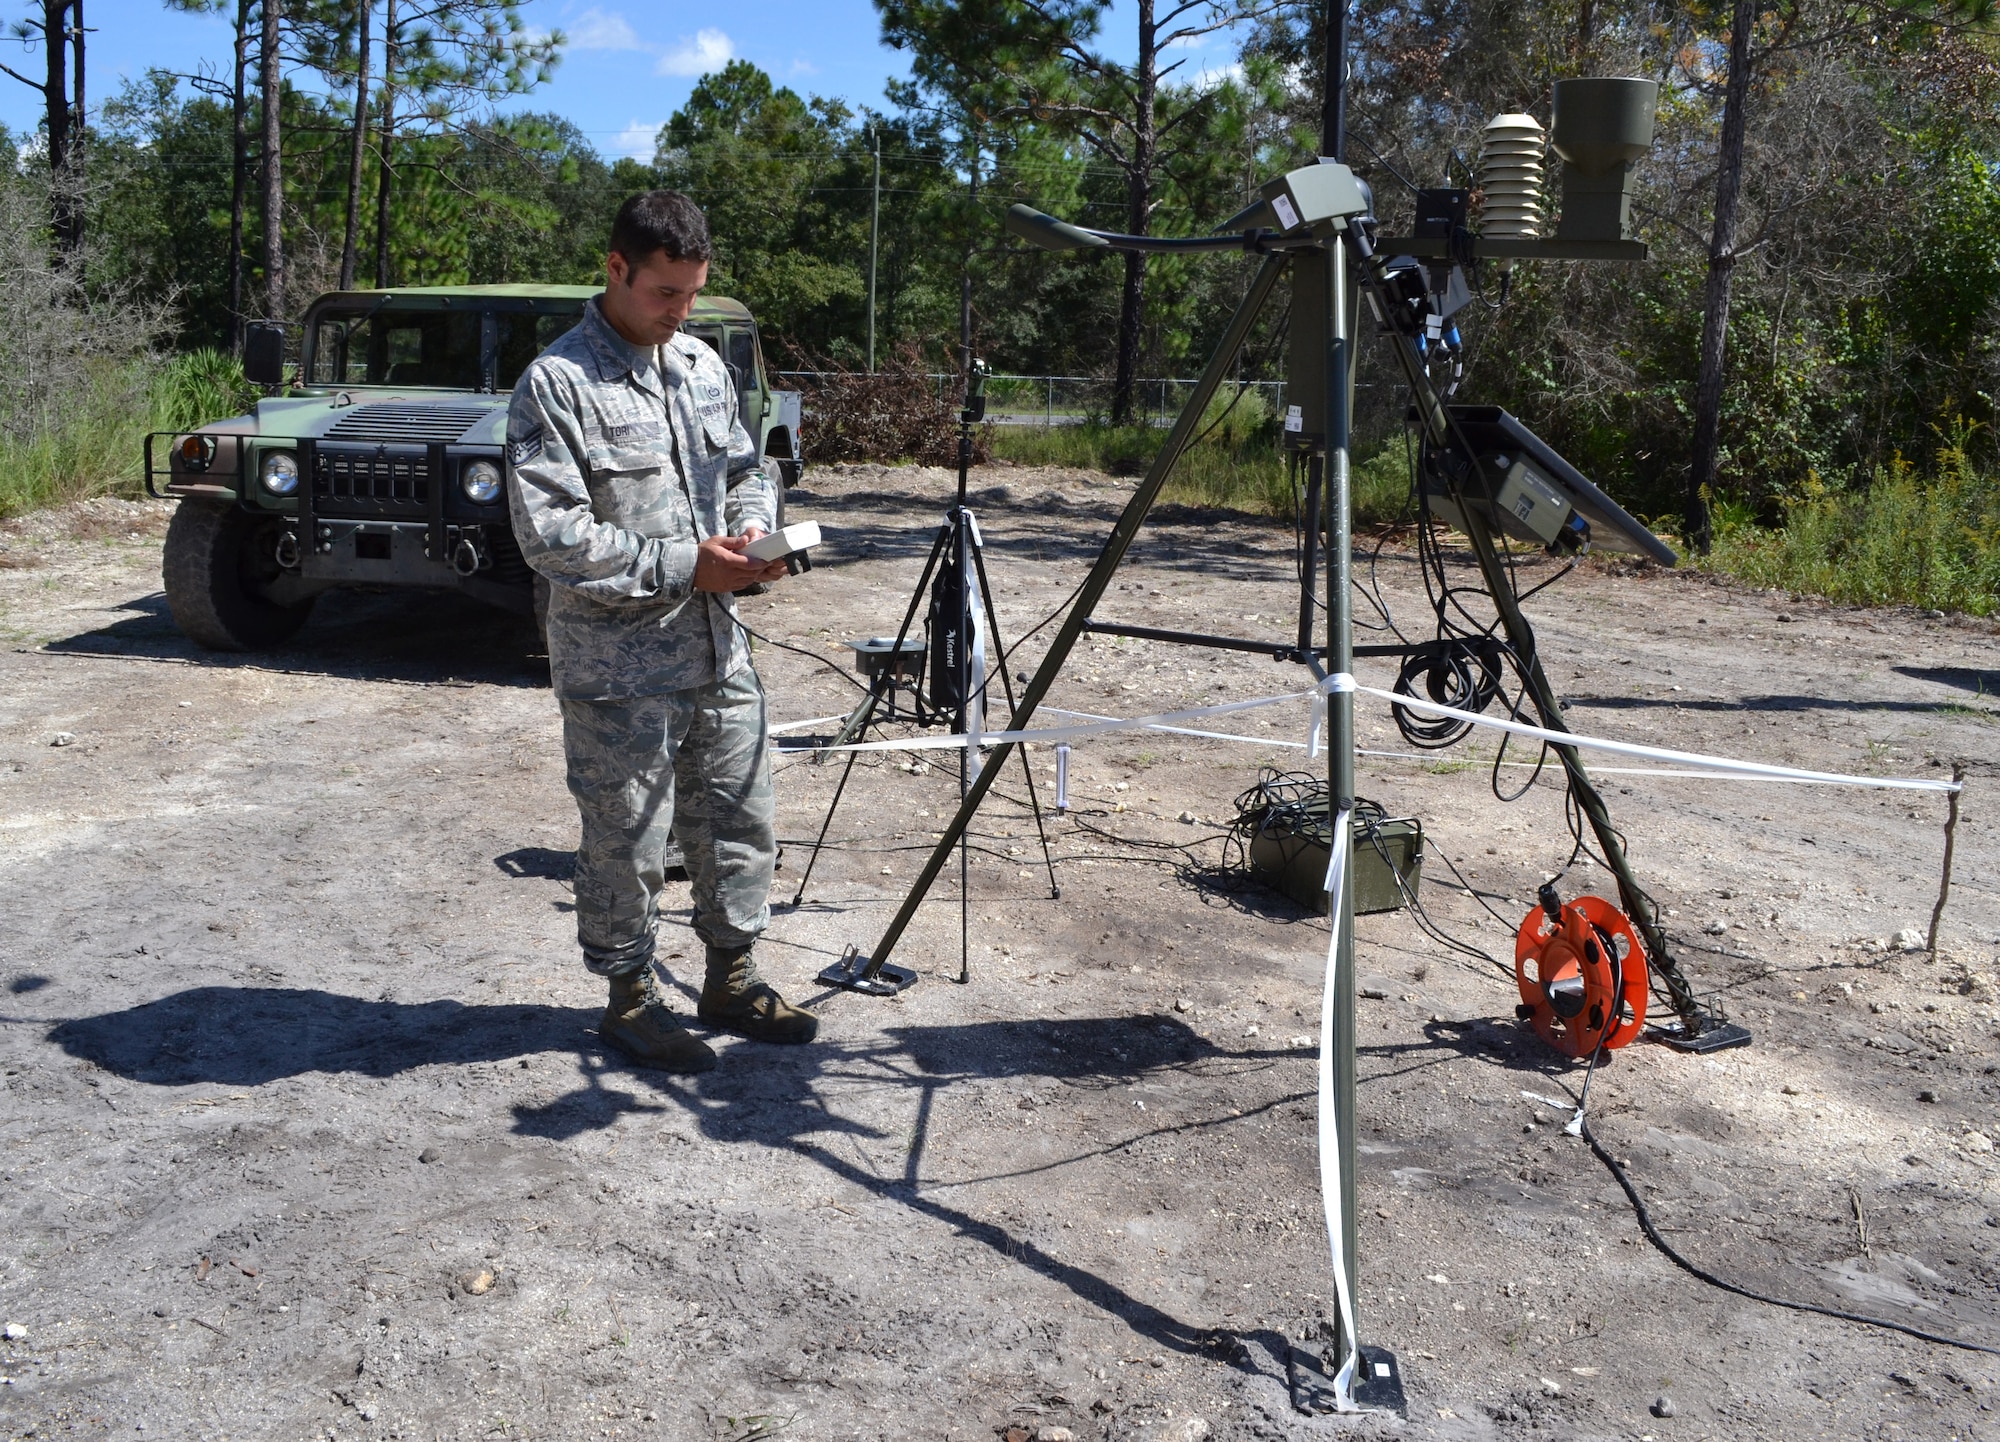 Staff Sgt. Phil Tori demonstrates operation of the handheld weather monitoring equipment during an Field Training Exercise Oct. 4, 2014 at the Camp Blanding Joint Training Center, Starke Fla. The FTX provided colaborative trainign between the 159th Weather Flight and the 290th Joint Communications Support Squadron. (U.S. Air National Guard photo by Tech. Sgt. William Buchanan)